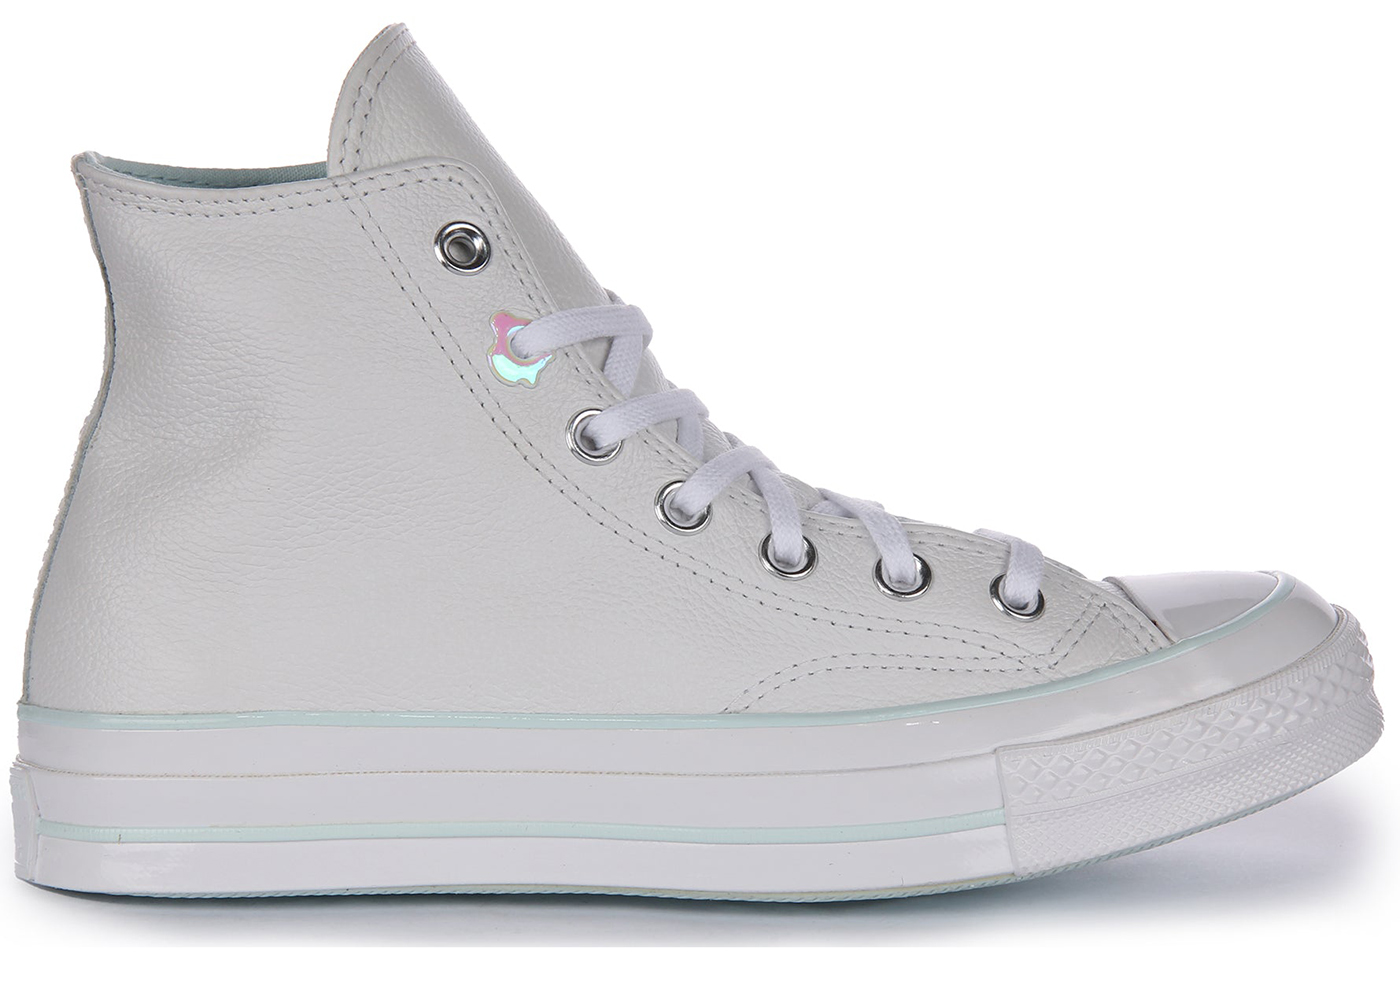 Converse Chuck Taylor All Star 70 Hi White Out Leather